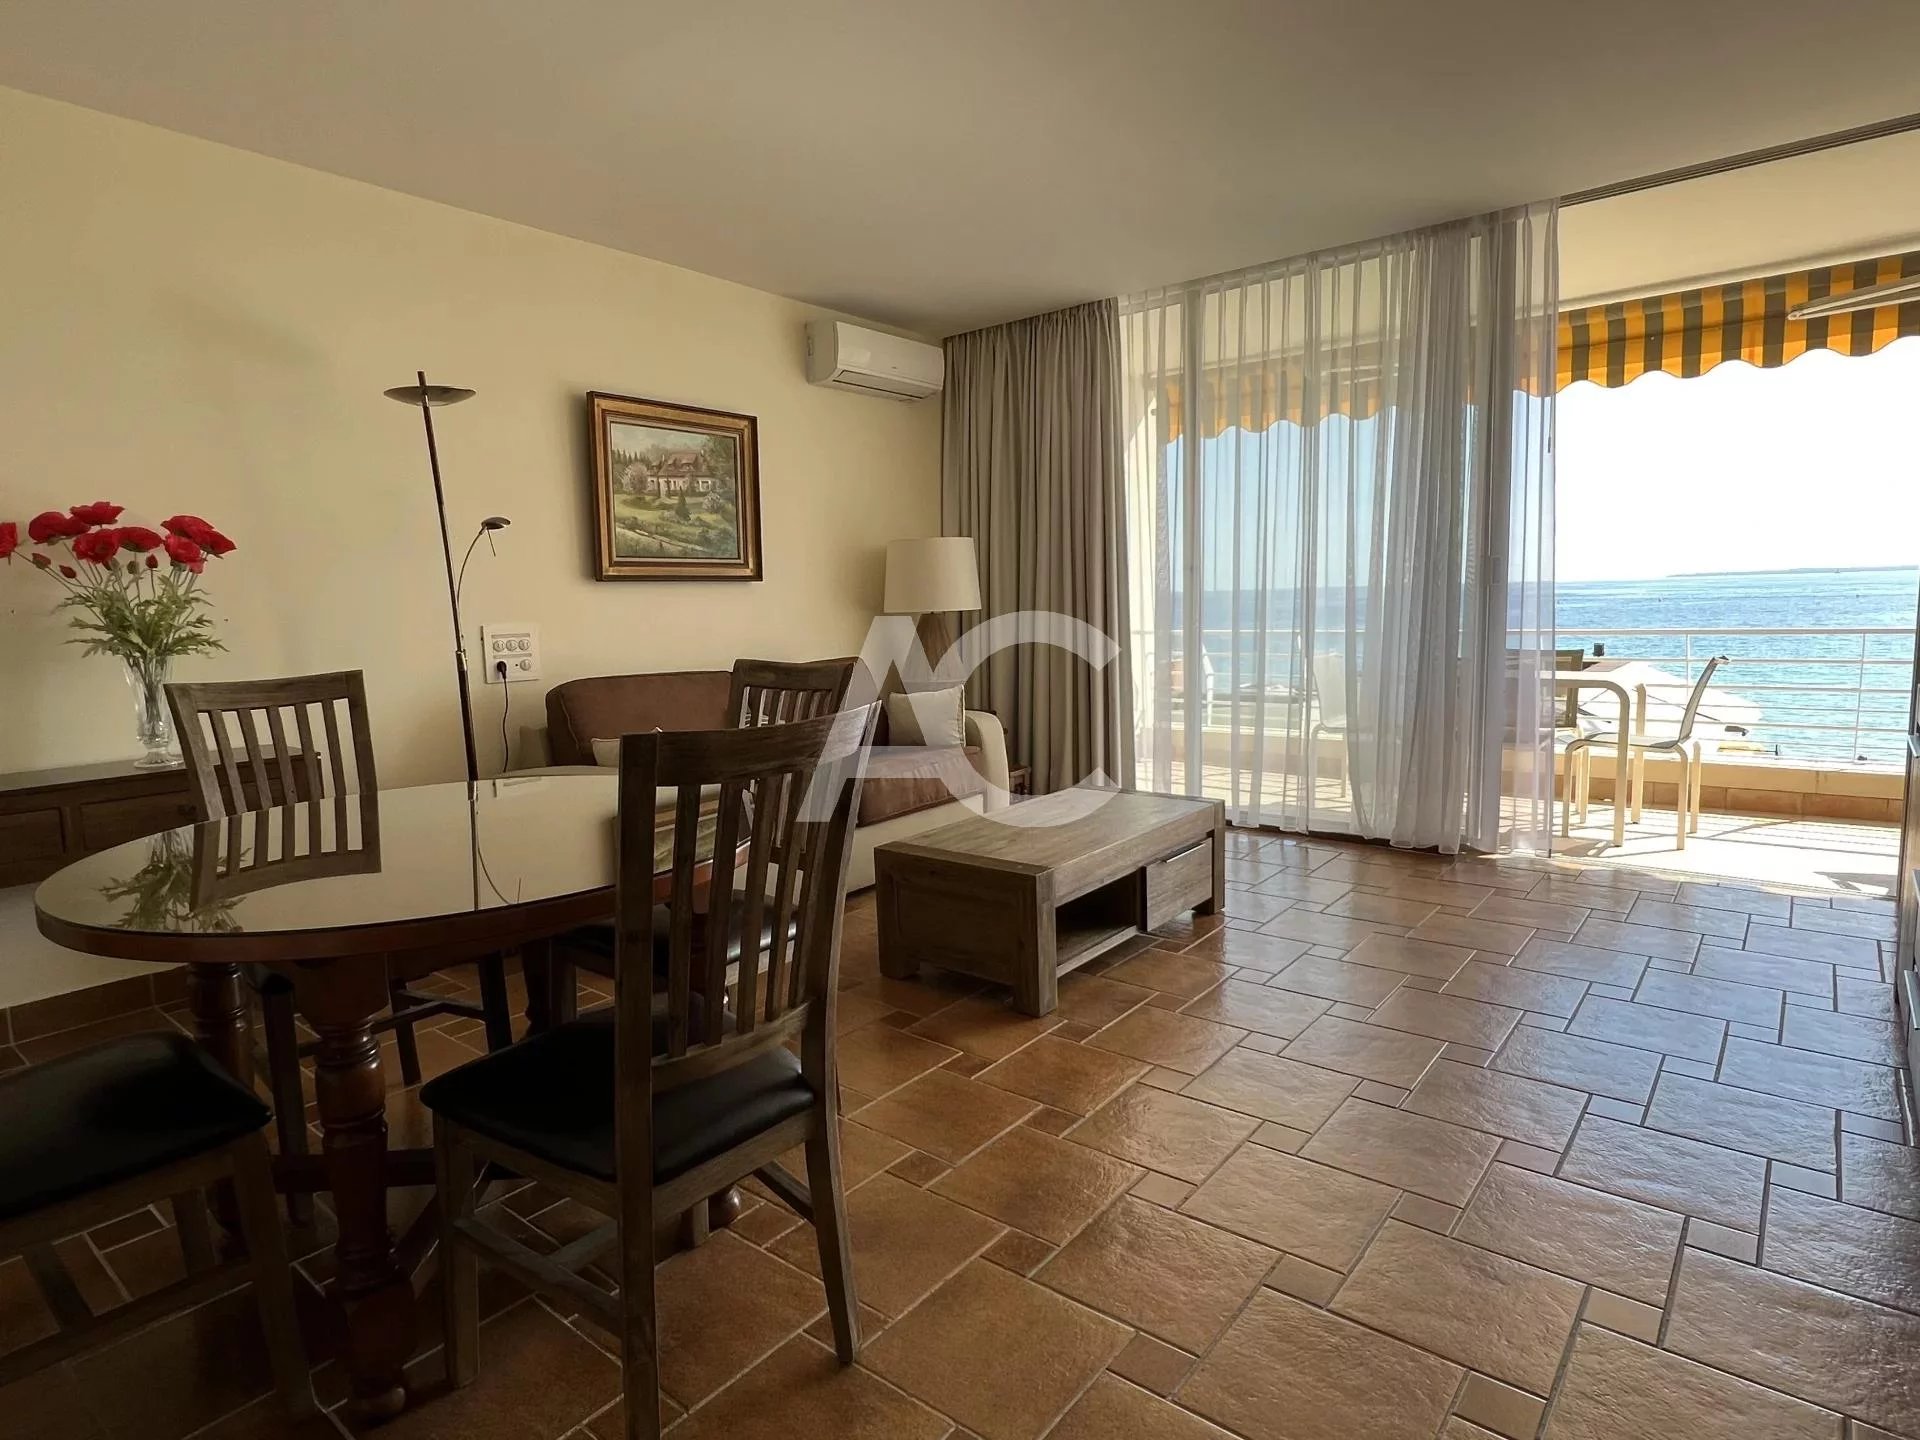 Apartment on the seafront - Juan les Pins